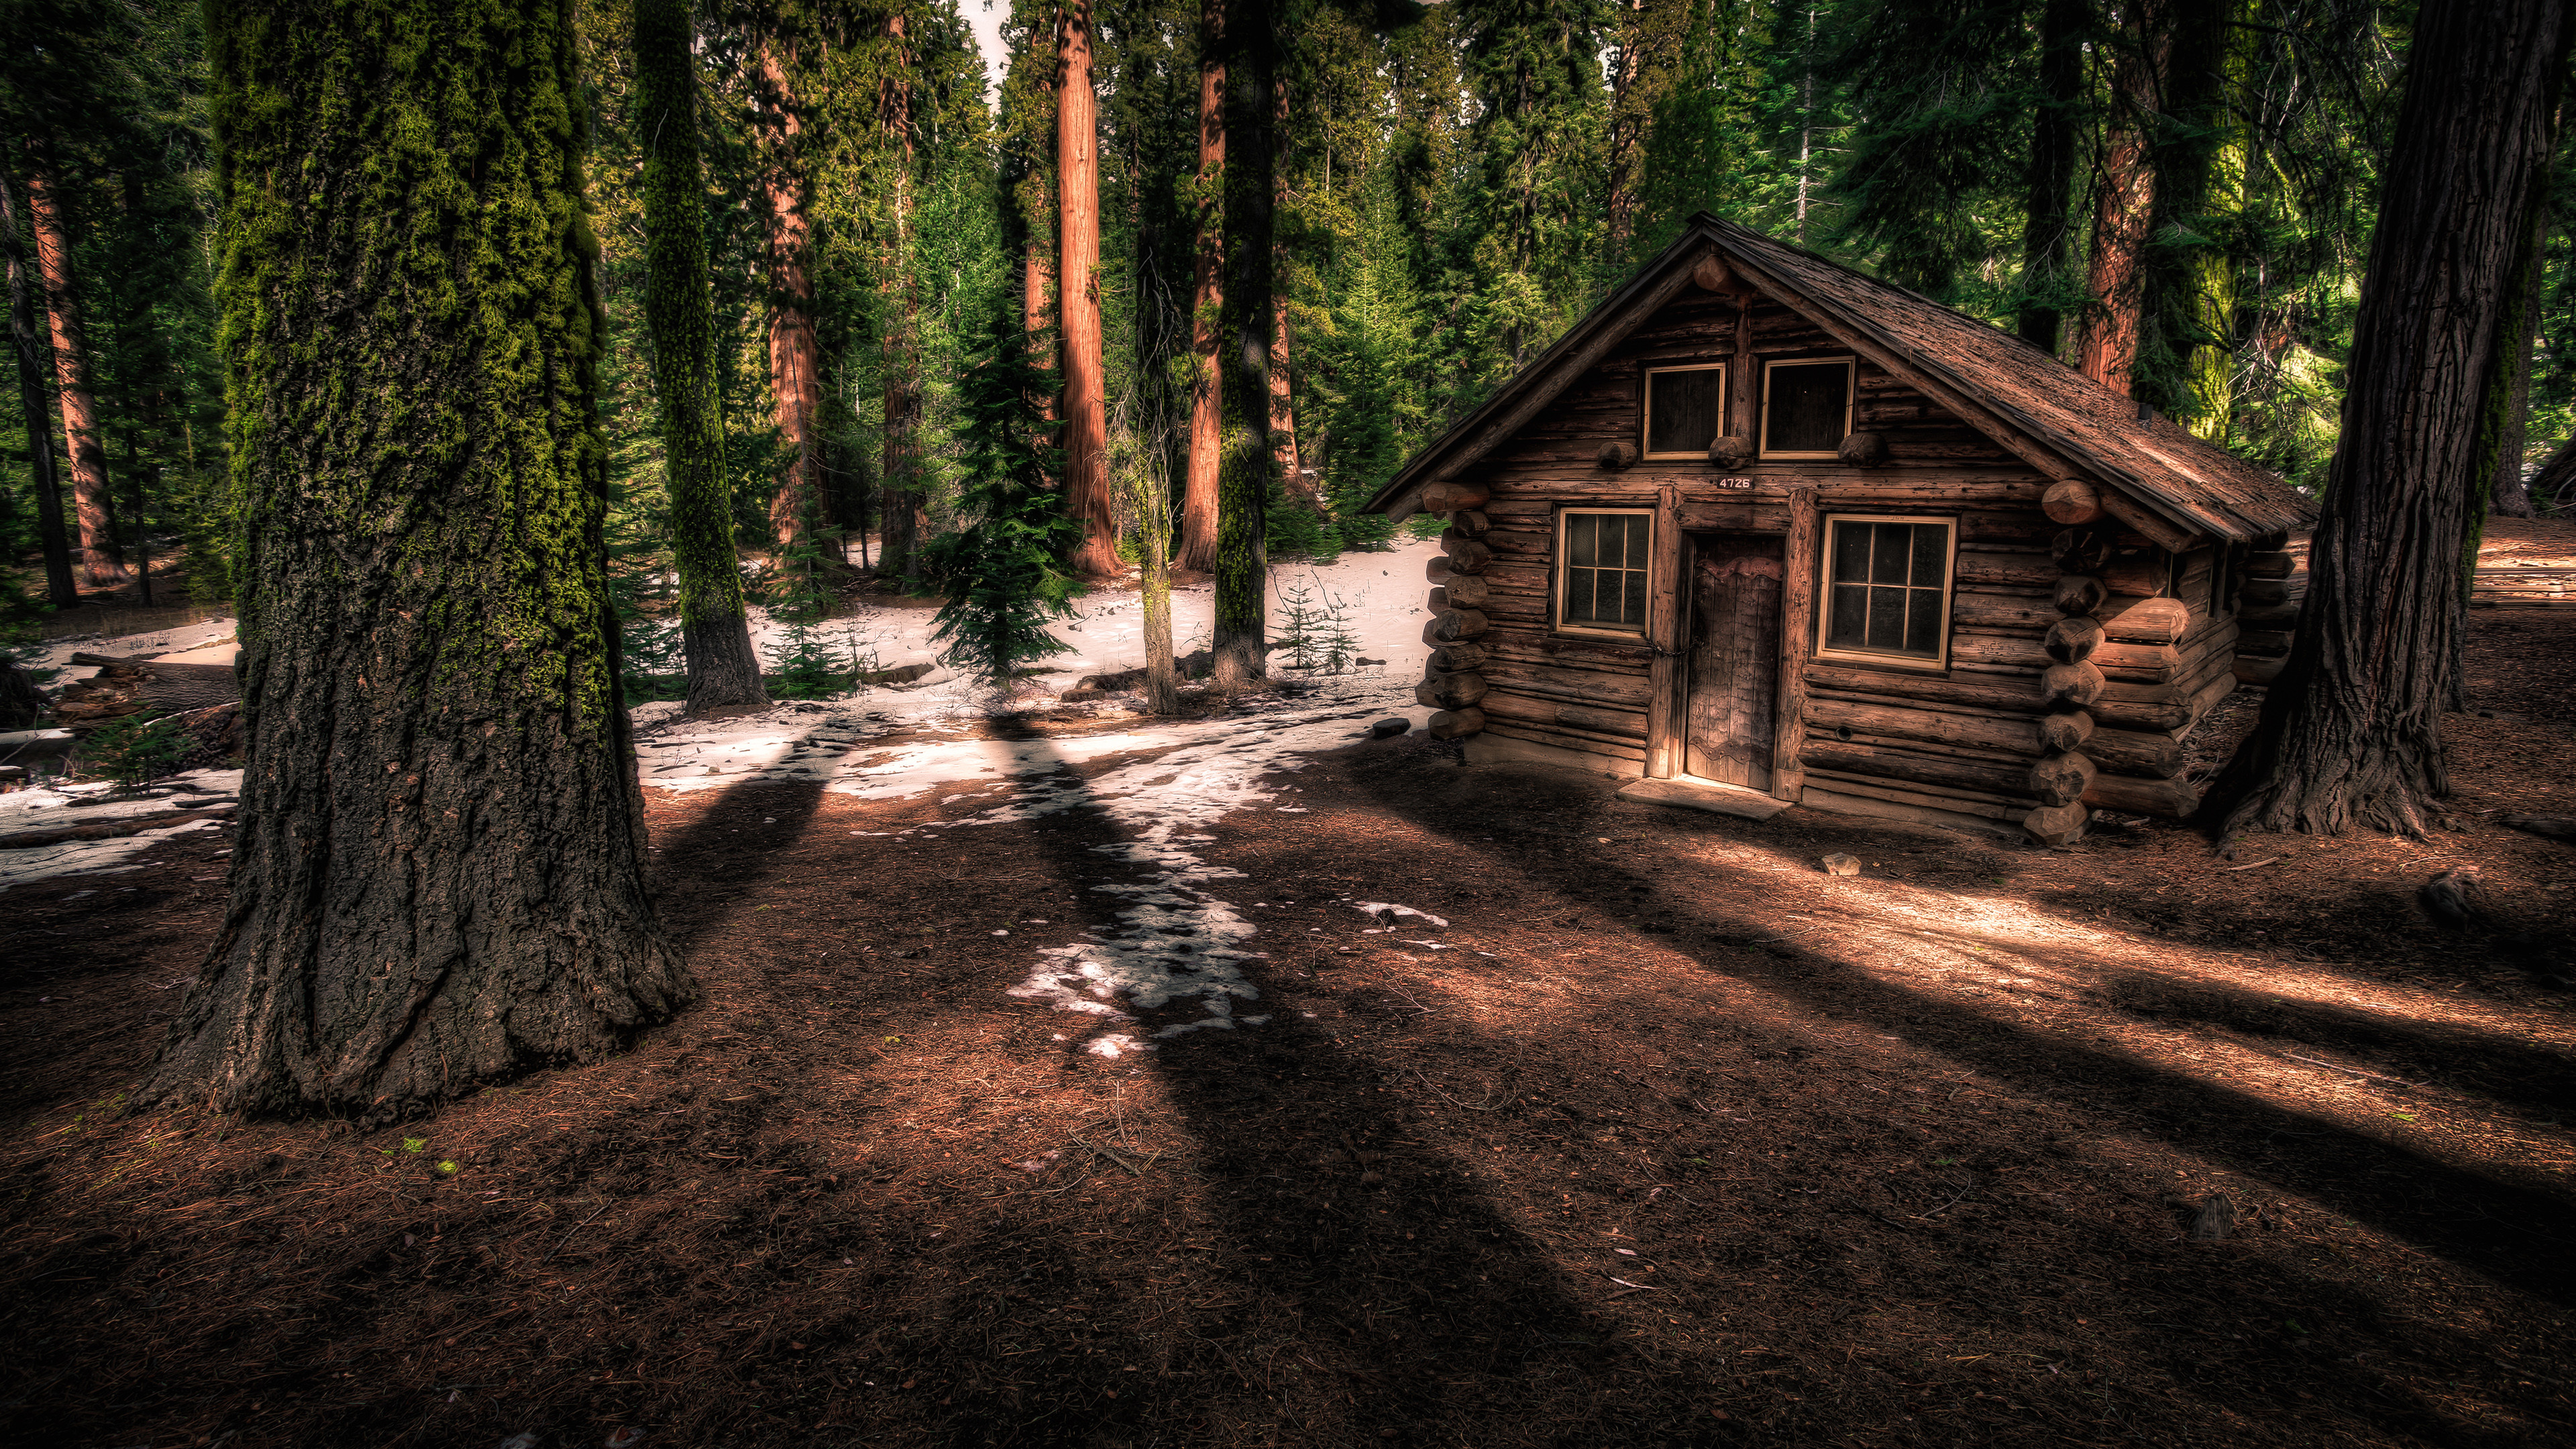 Cabin In The Woods Submitted To WqHD Wallpaper By Cybrbeast